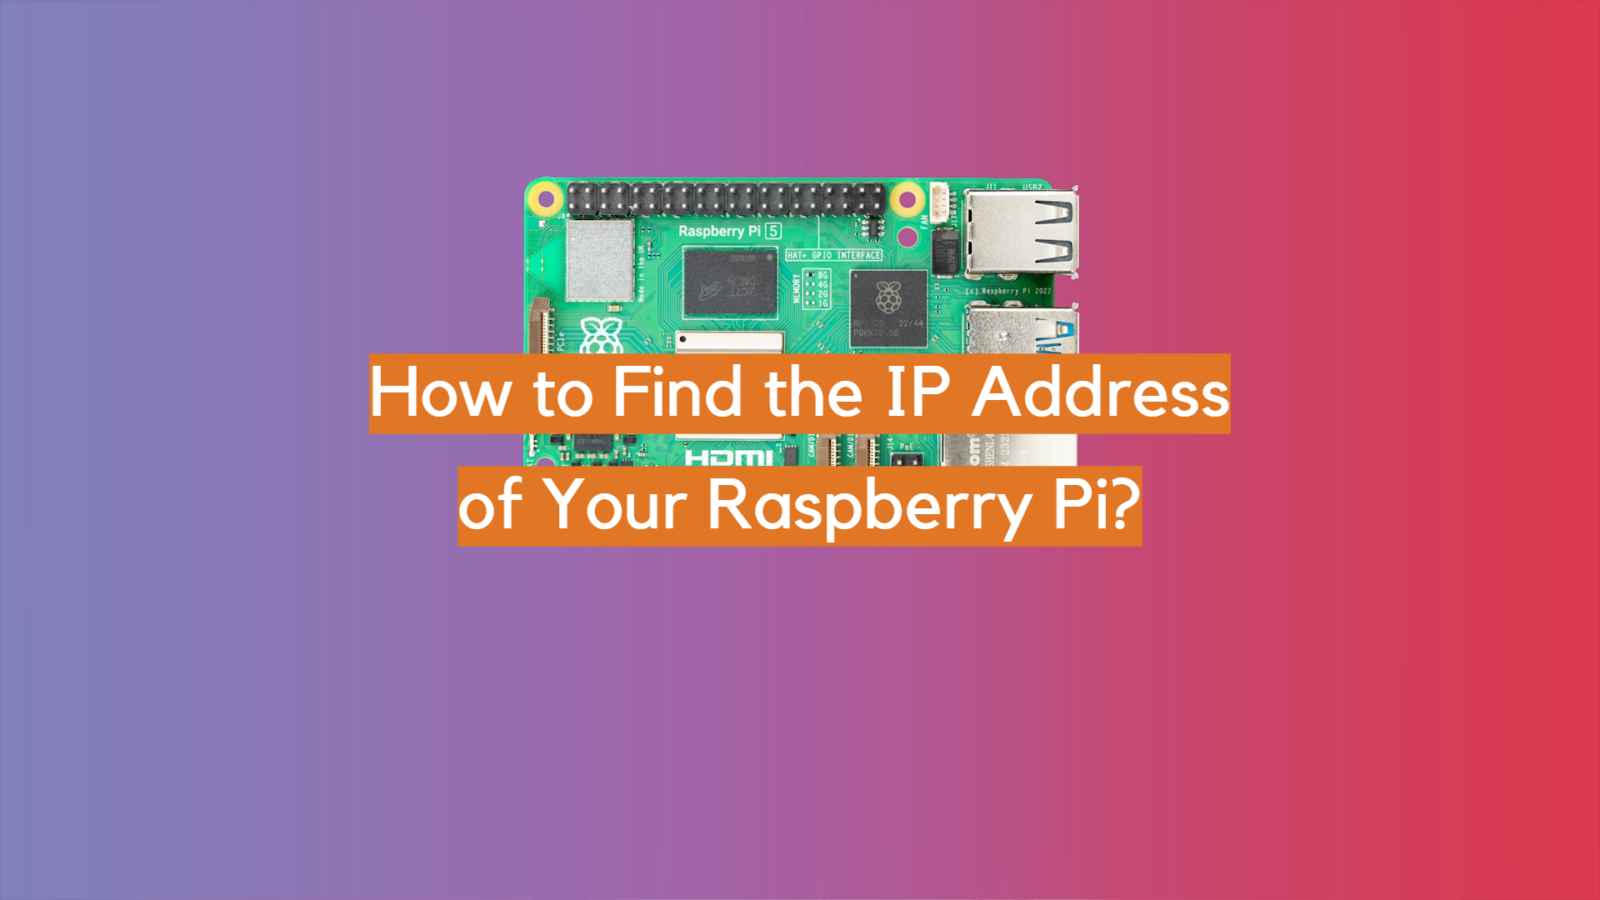 How to Find the IP Address of Your Raspberry Pi?